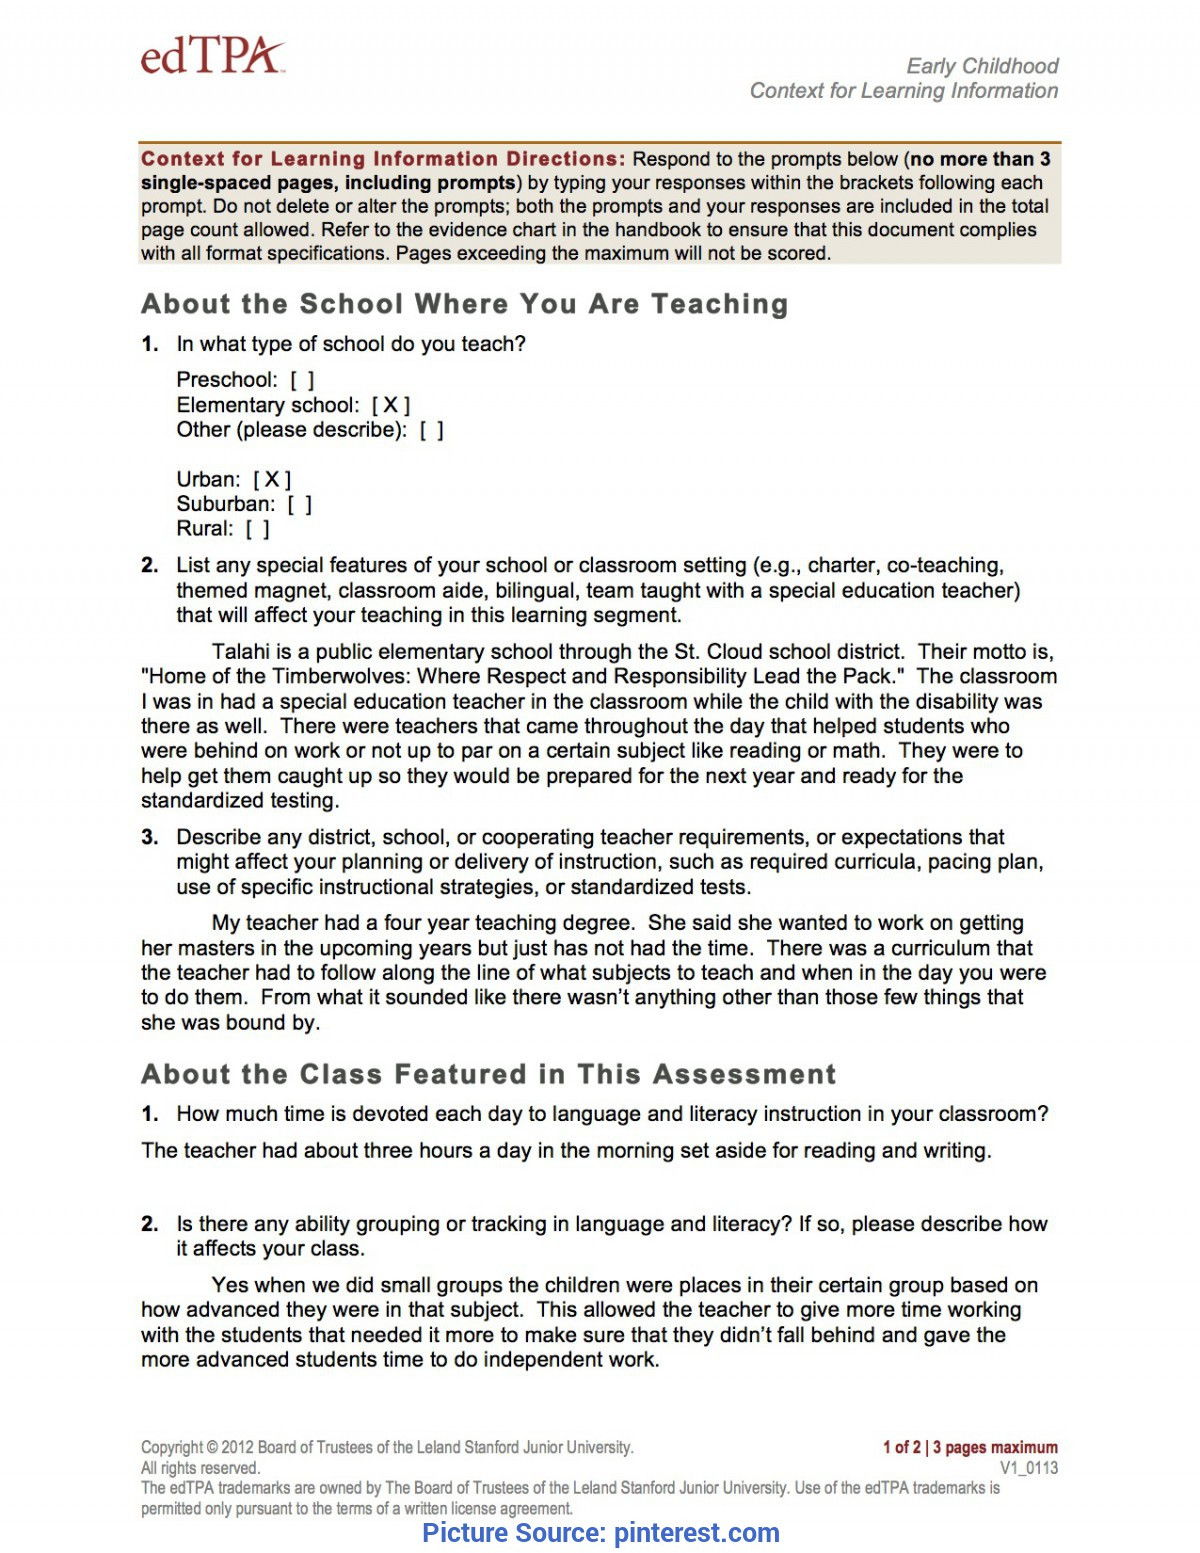 Edtpa Lesson Plan Example Valuable Edtpa Context for Learning Sample Edtpa Practice